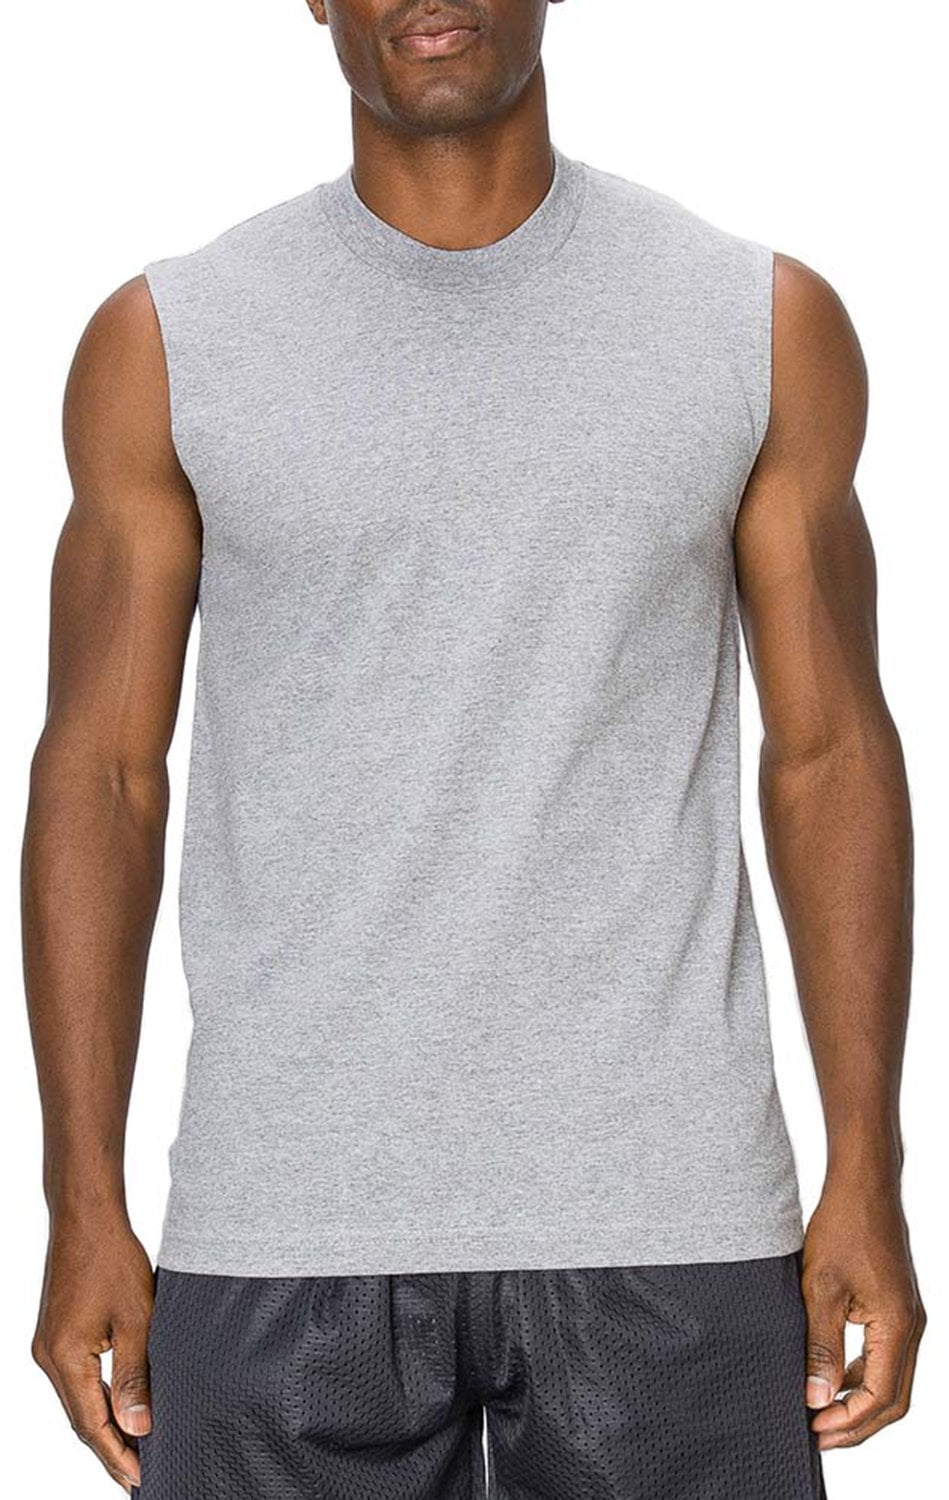 Yingqible Mens Casual V-Neck Sleeveless Tee Shirts Gym Muscle T-Shirts Sport Tank Tops 